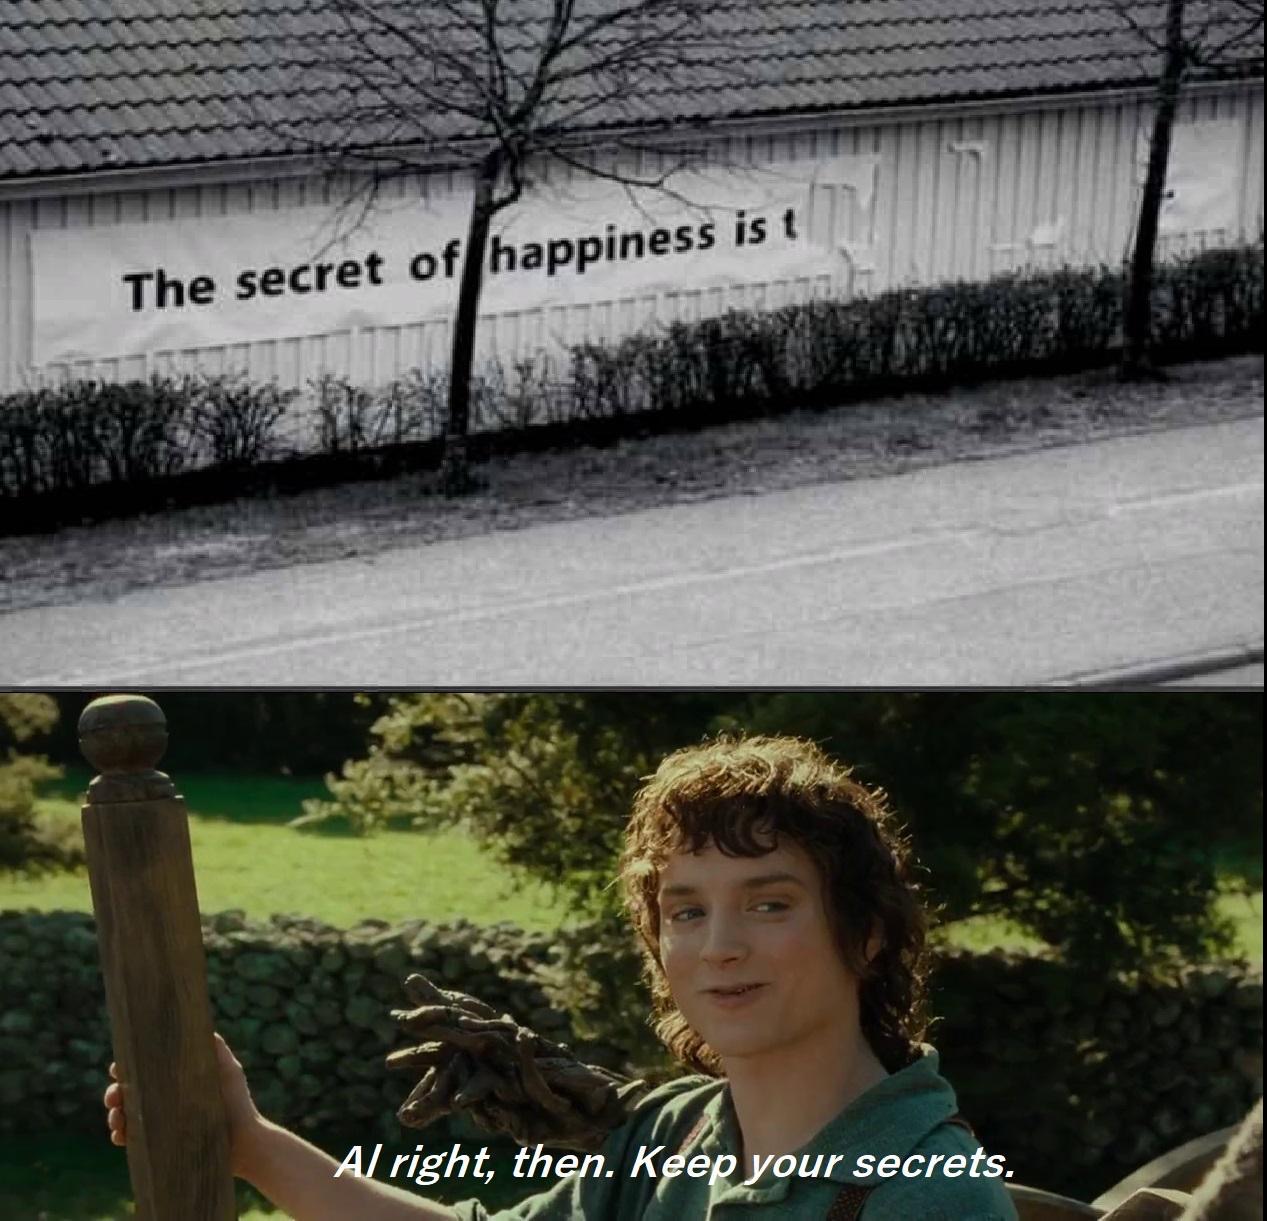 secret of happiness - The secret of happiness is t Al right, then. Keep your secrets.